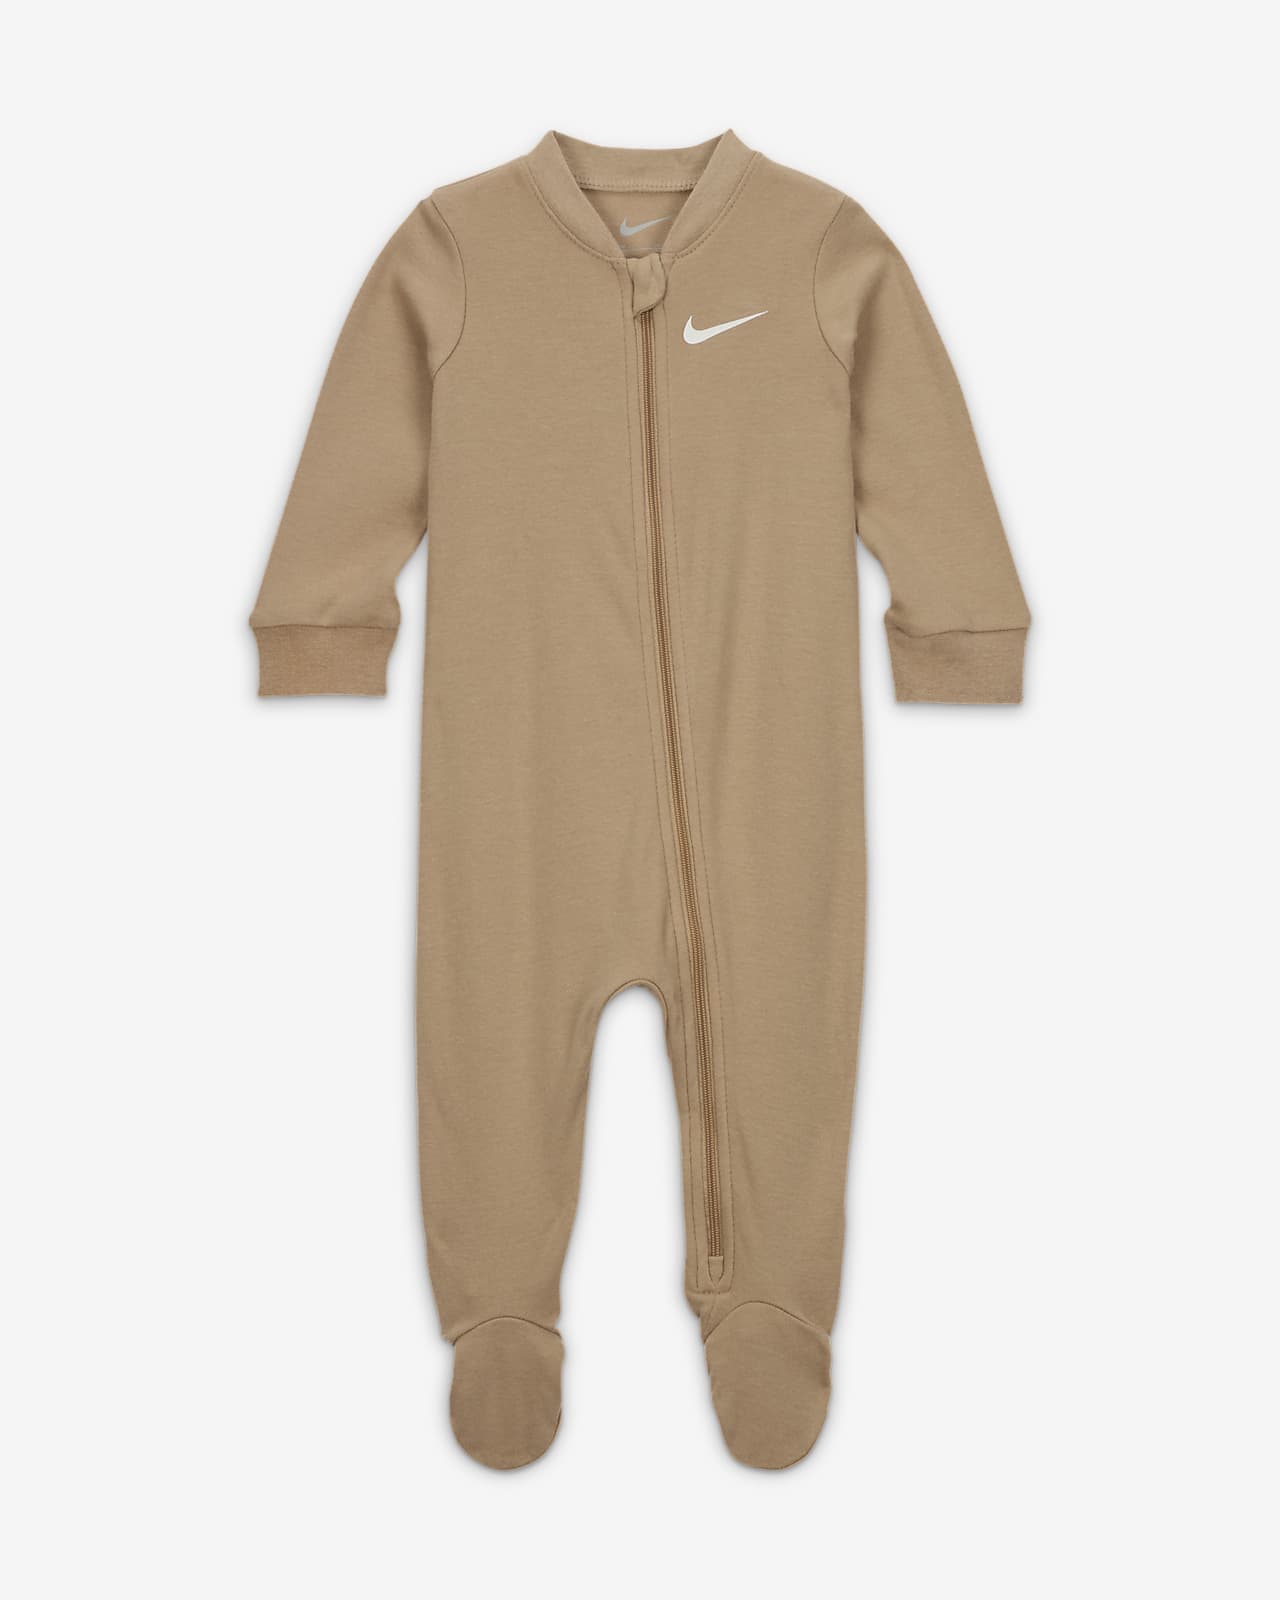 Nike Essentials Footed Coverall Baby Coverall. | Strampler